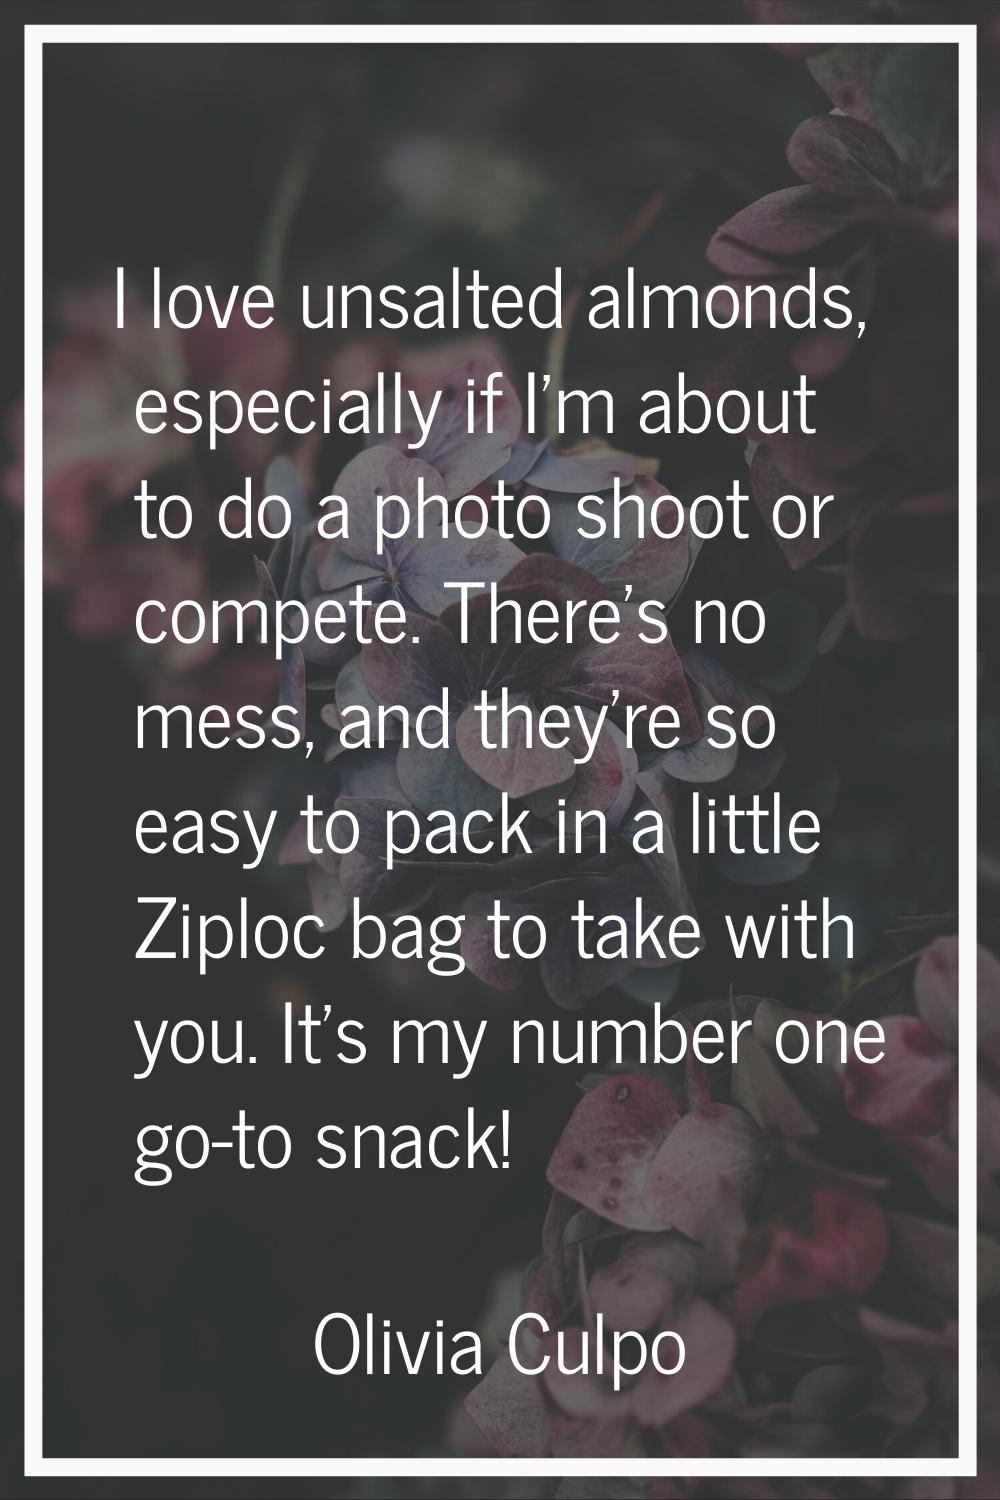 I love unsalted almonds, especially if I'm about to do a photo shoot or compete. There's no mess, a